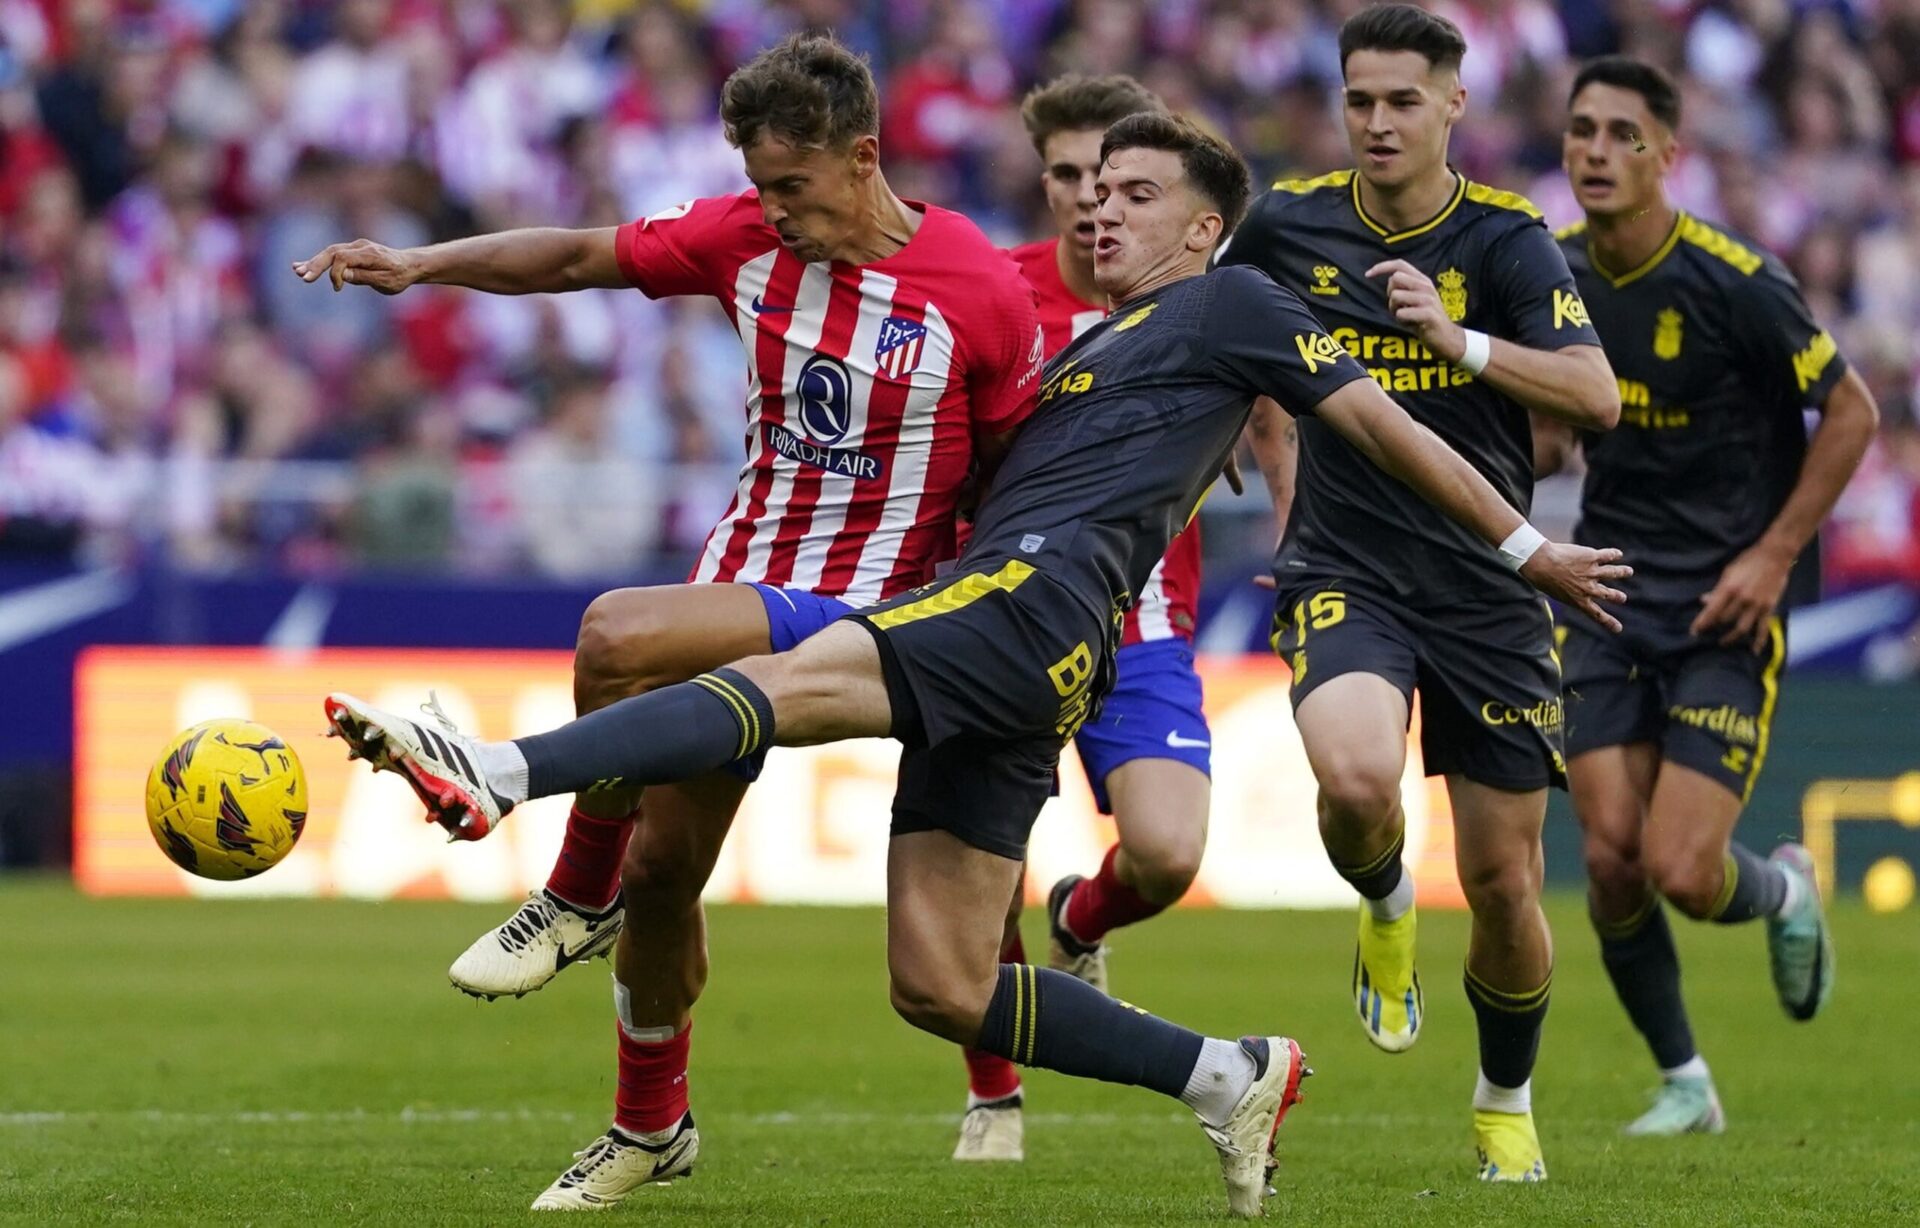 Atletico Madrid gets back on track with a 5-0 win over Las Palmas